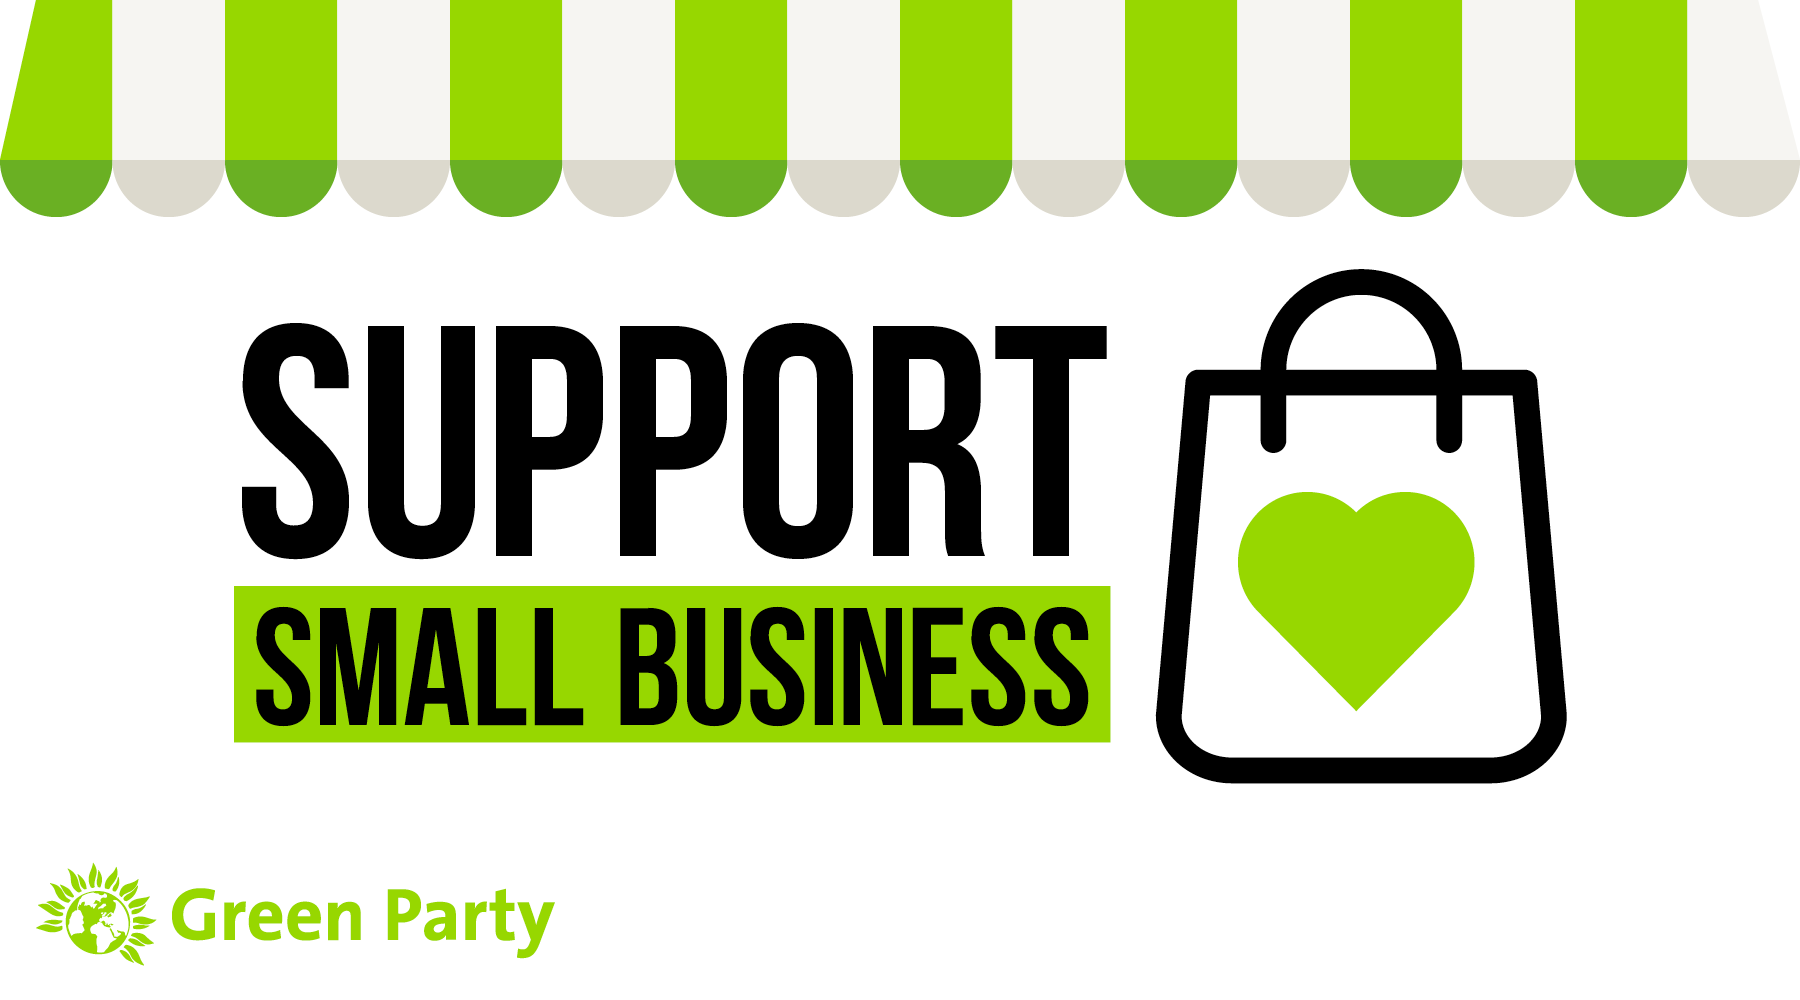 Green Party supports small business